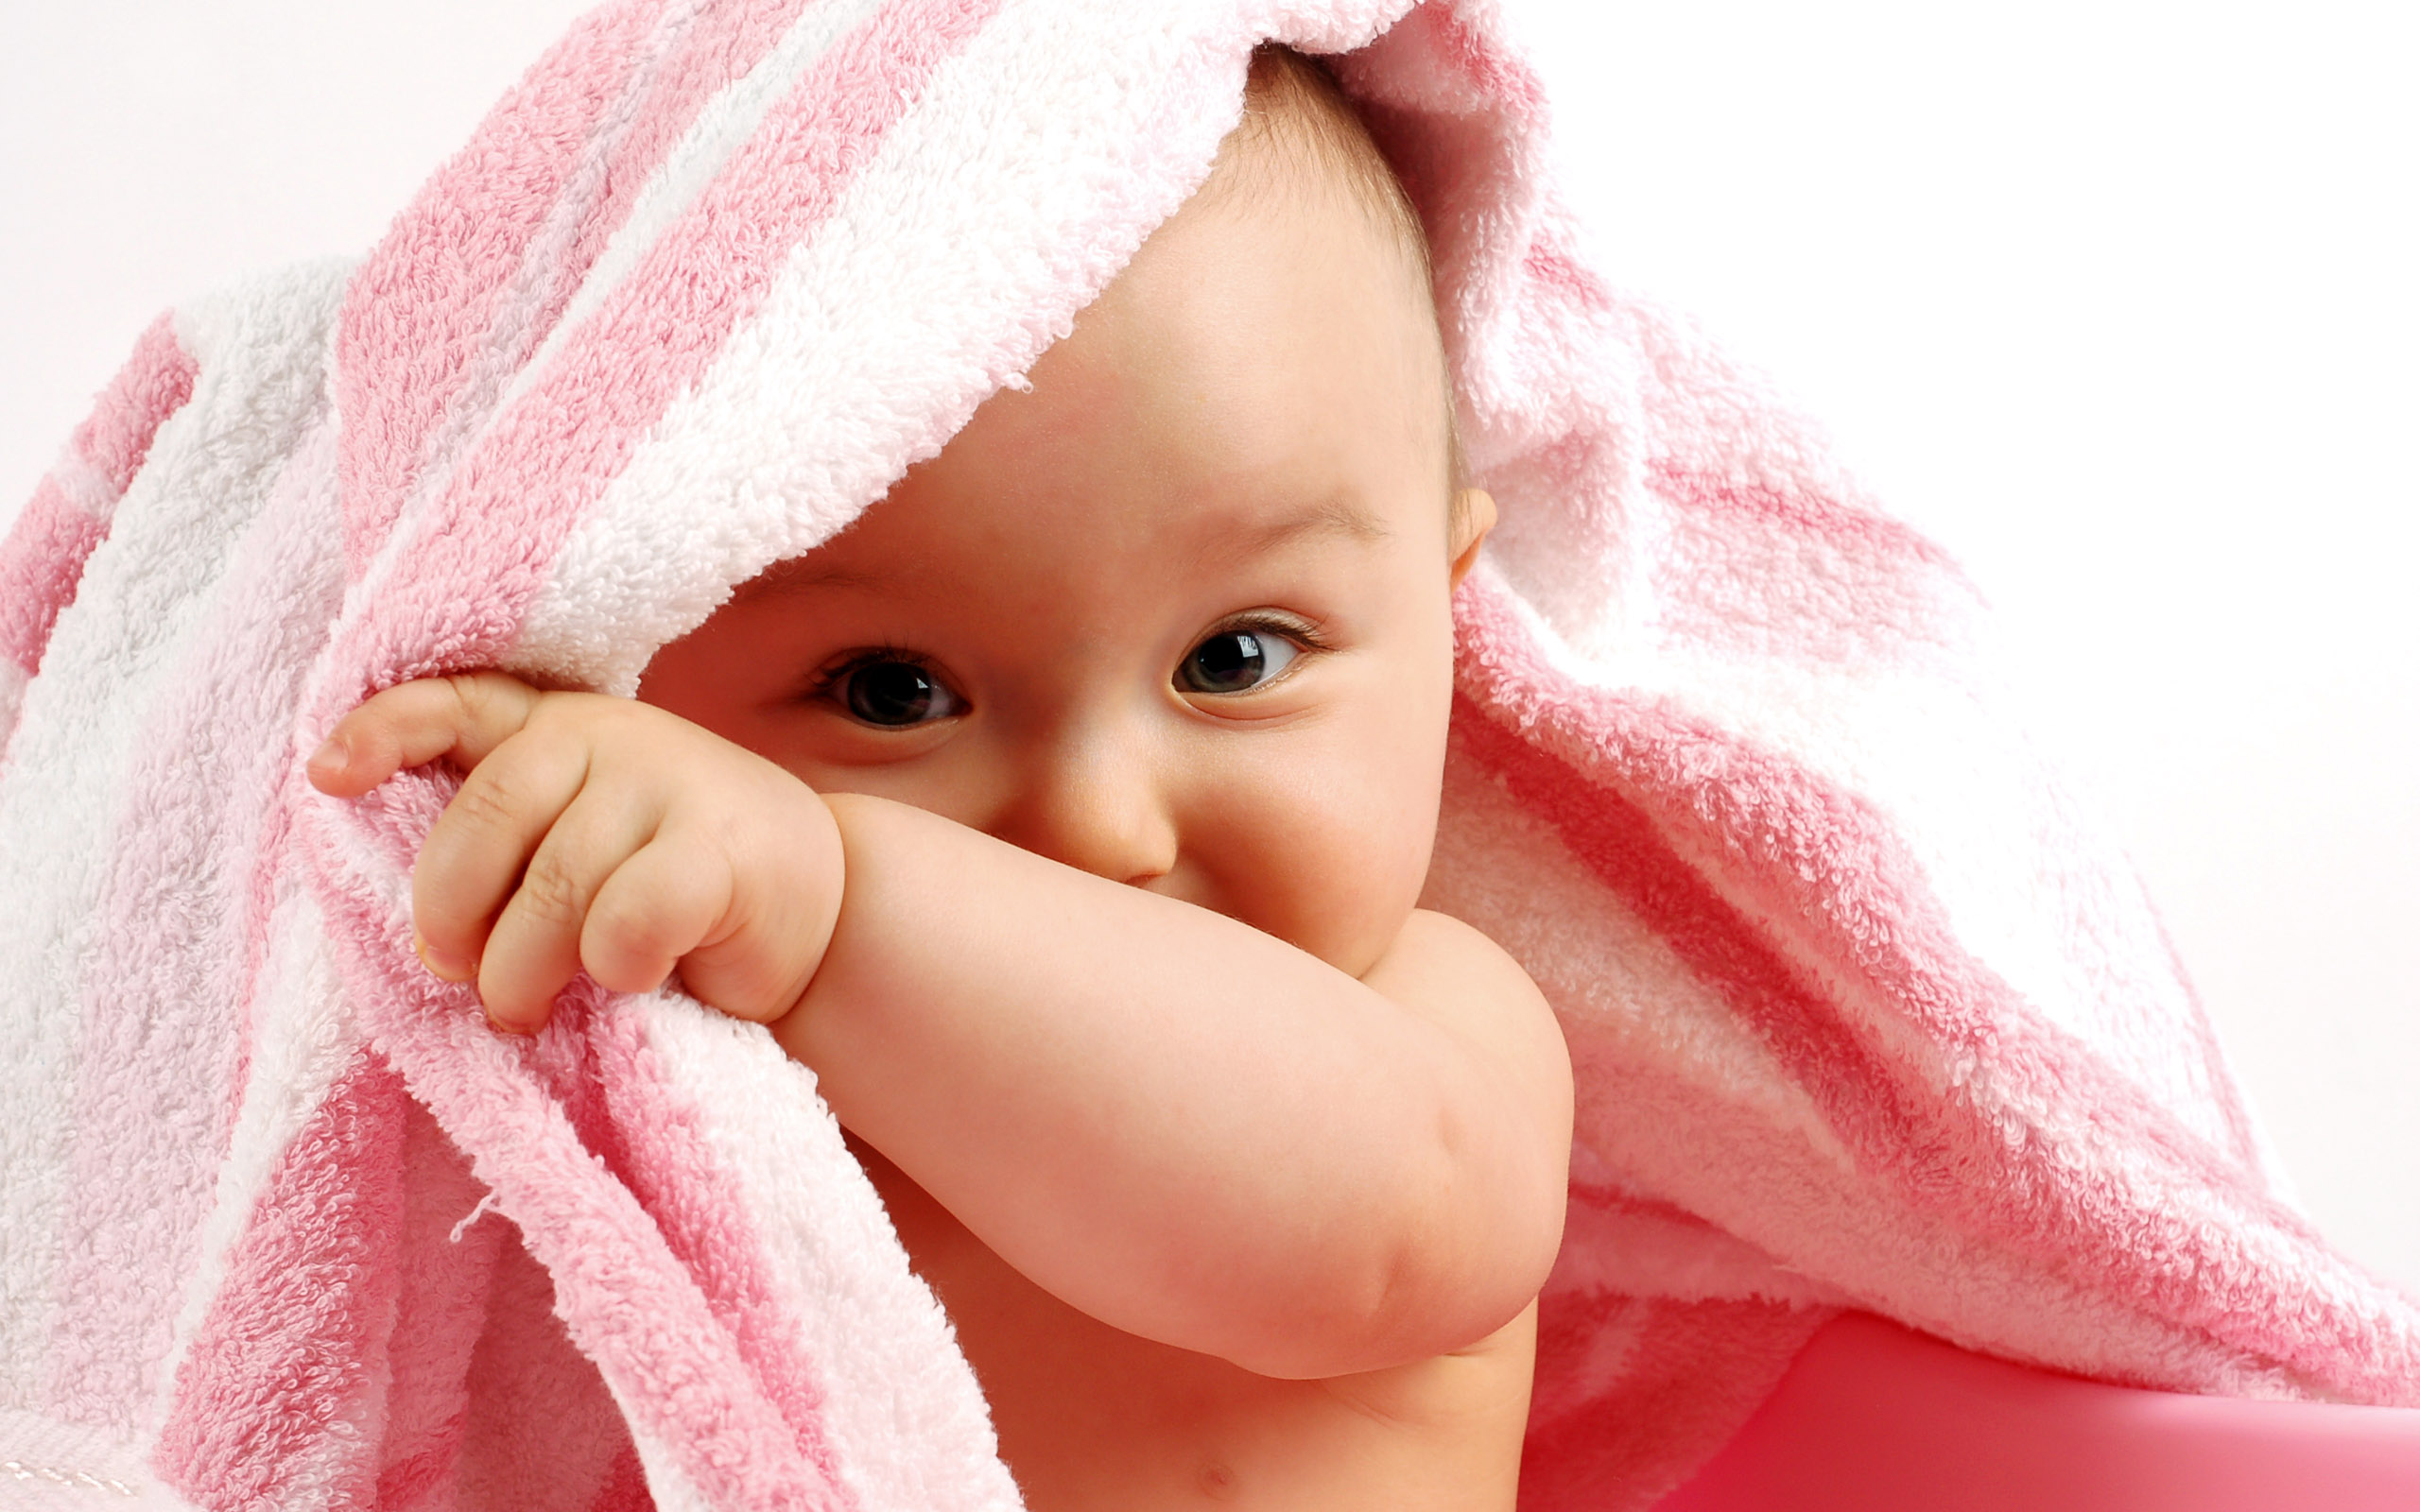 Cute Baby Boy 2 Wallpapers HD Wallpapers 2560x1600